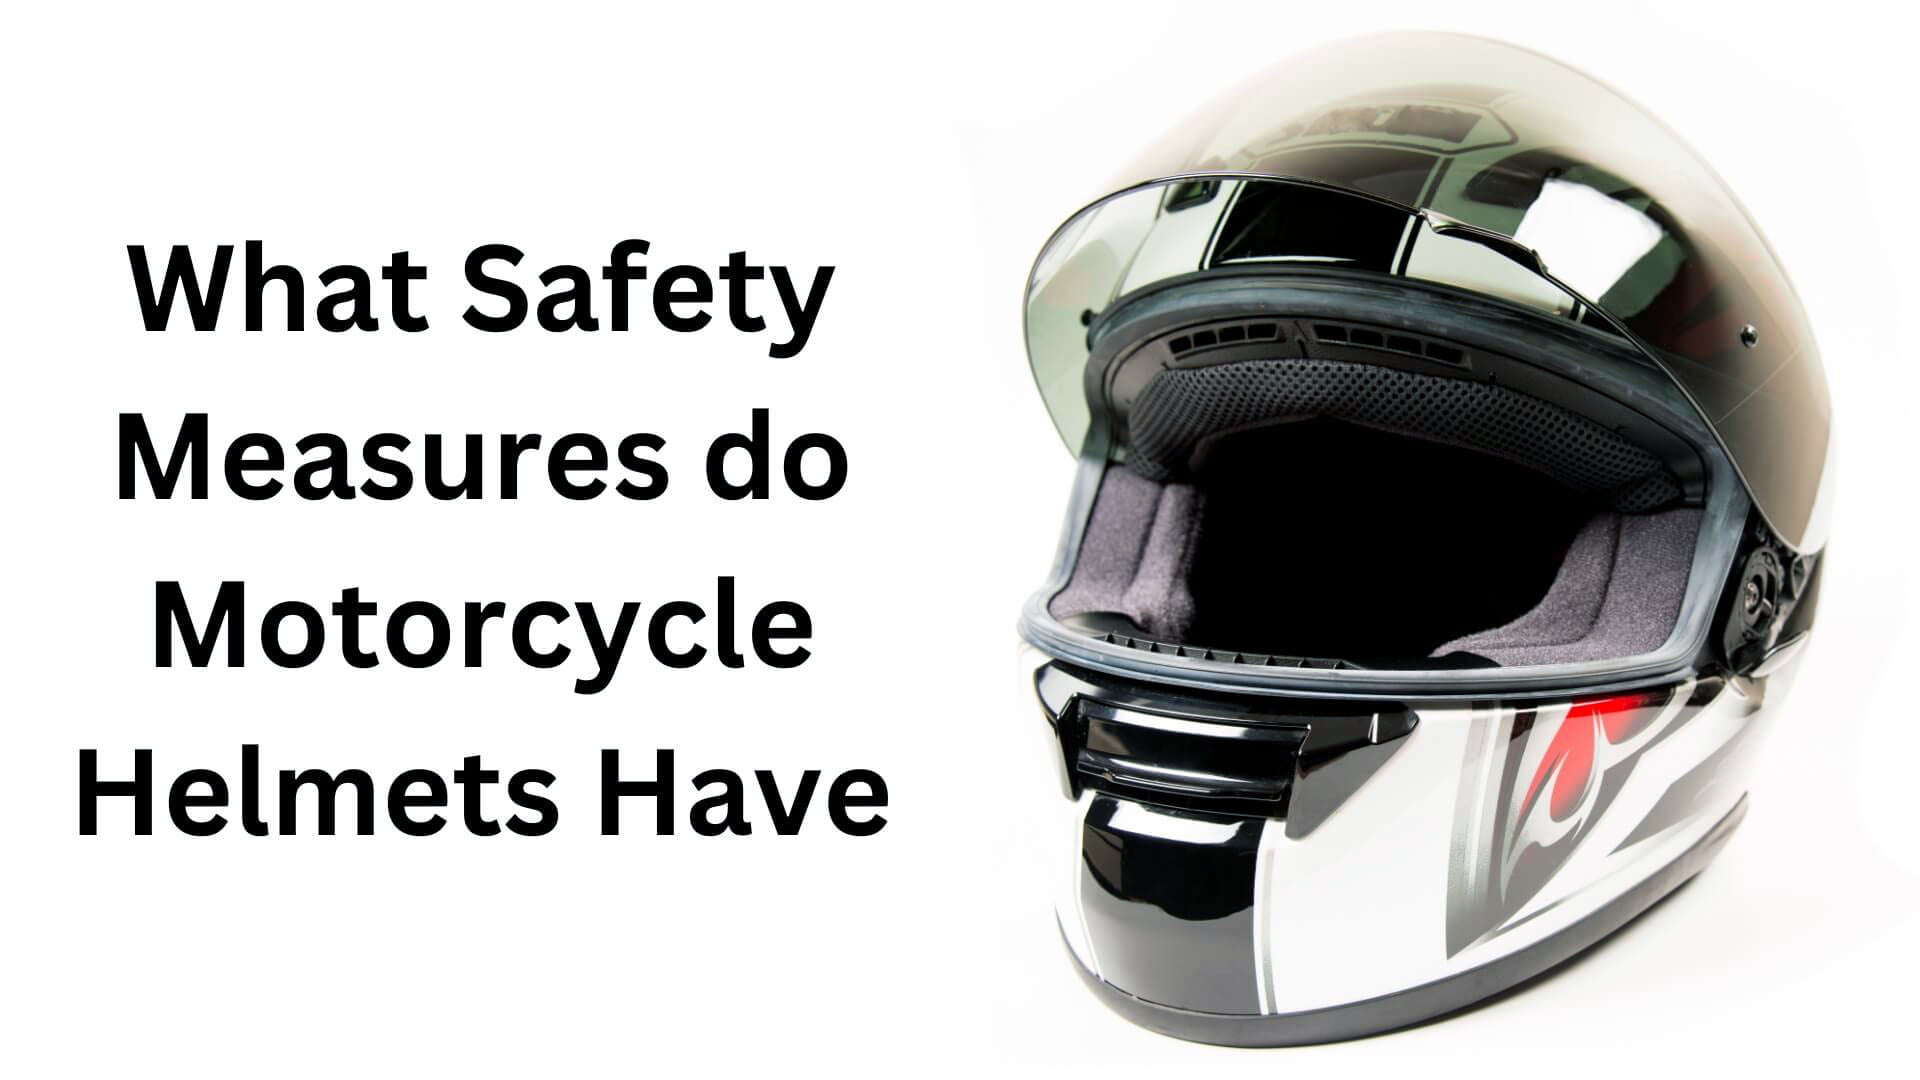 What safety measures do motorcycle helmets have